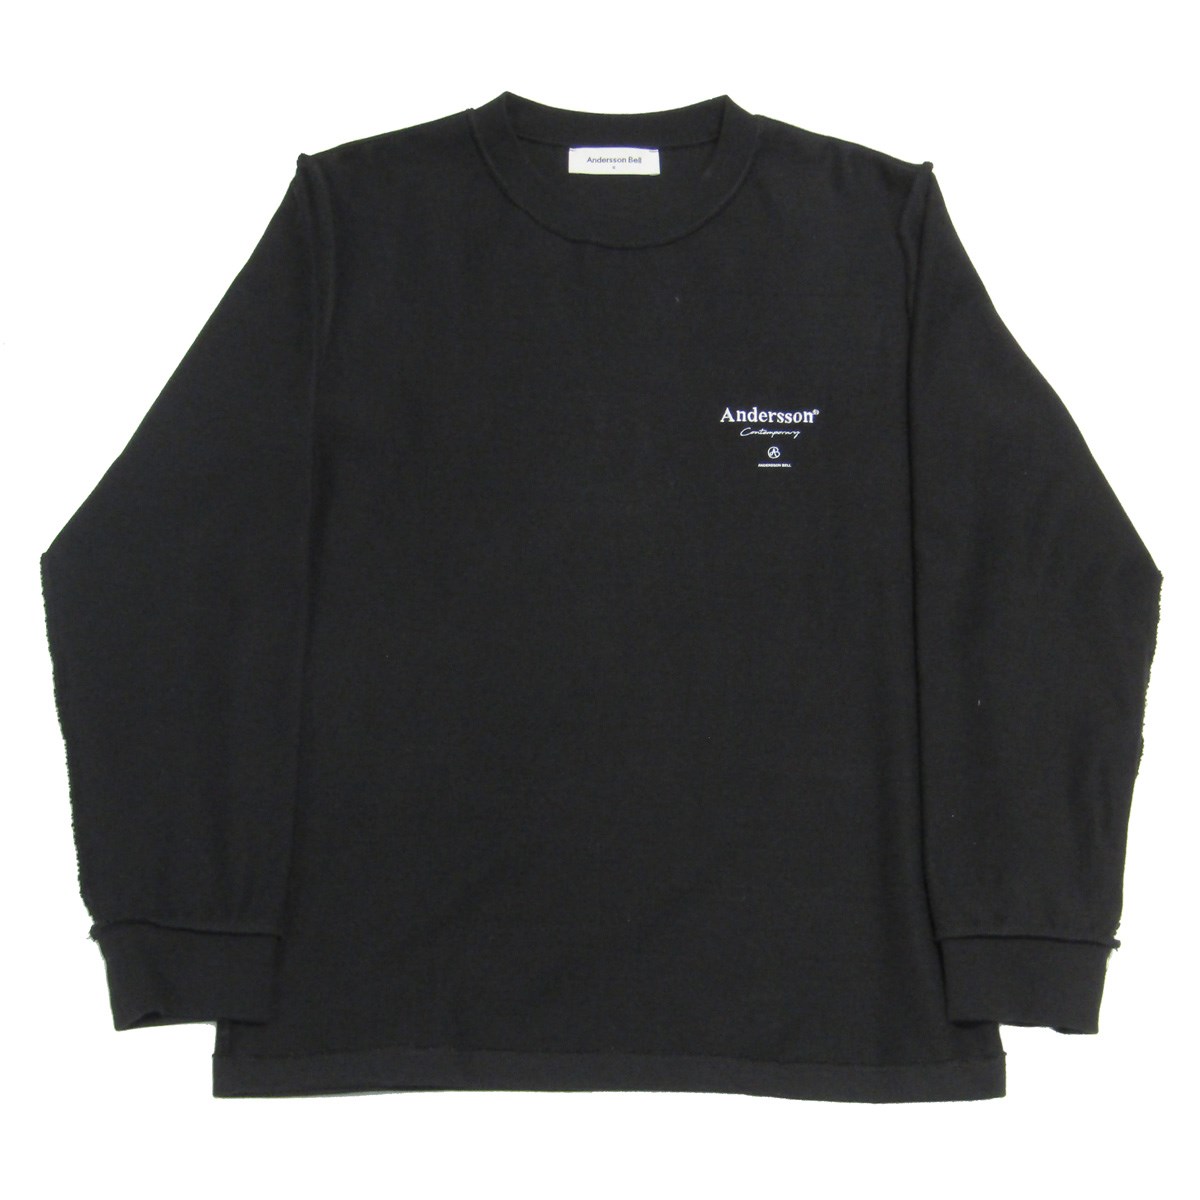   Andersson Bell@CREW NECK LS TEE IN SIDE OUT SXEFbg g[i[ ubN TCYFS  010520  A [\x 